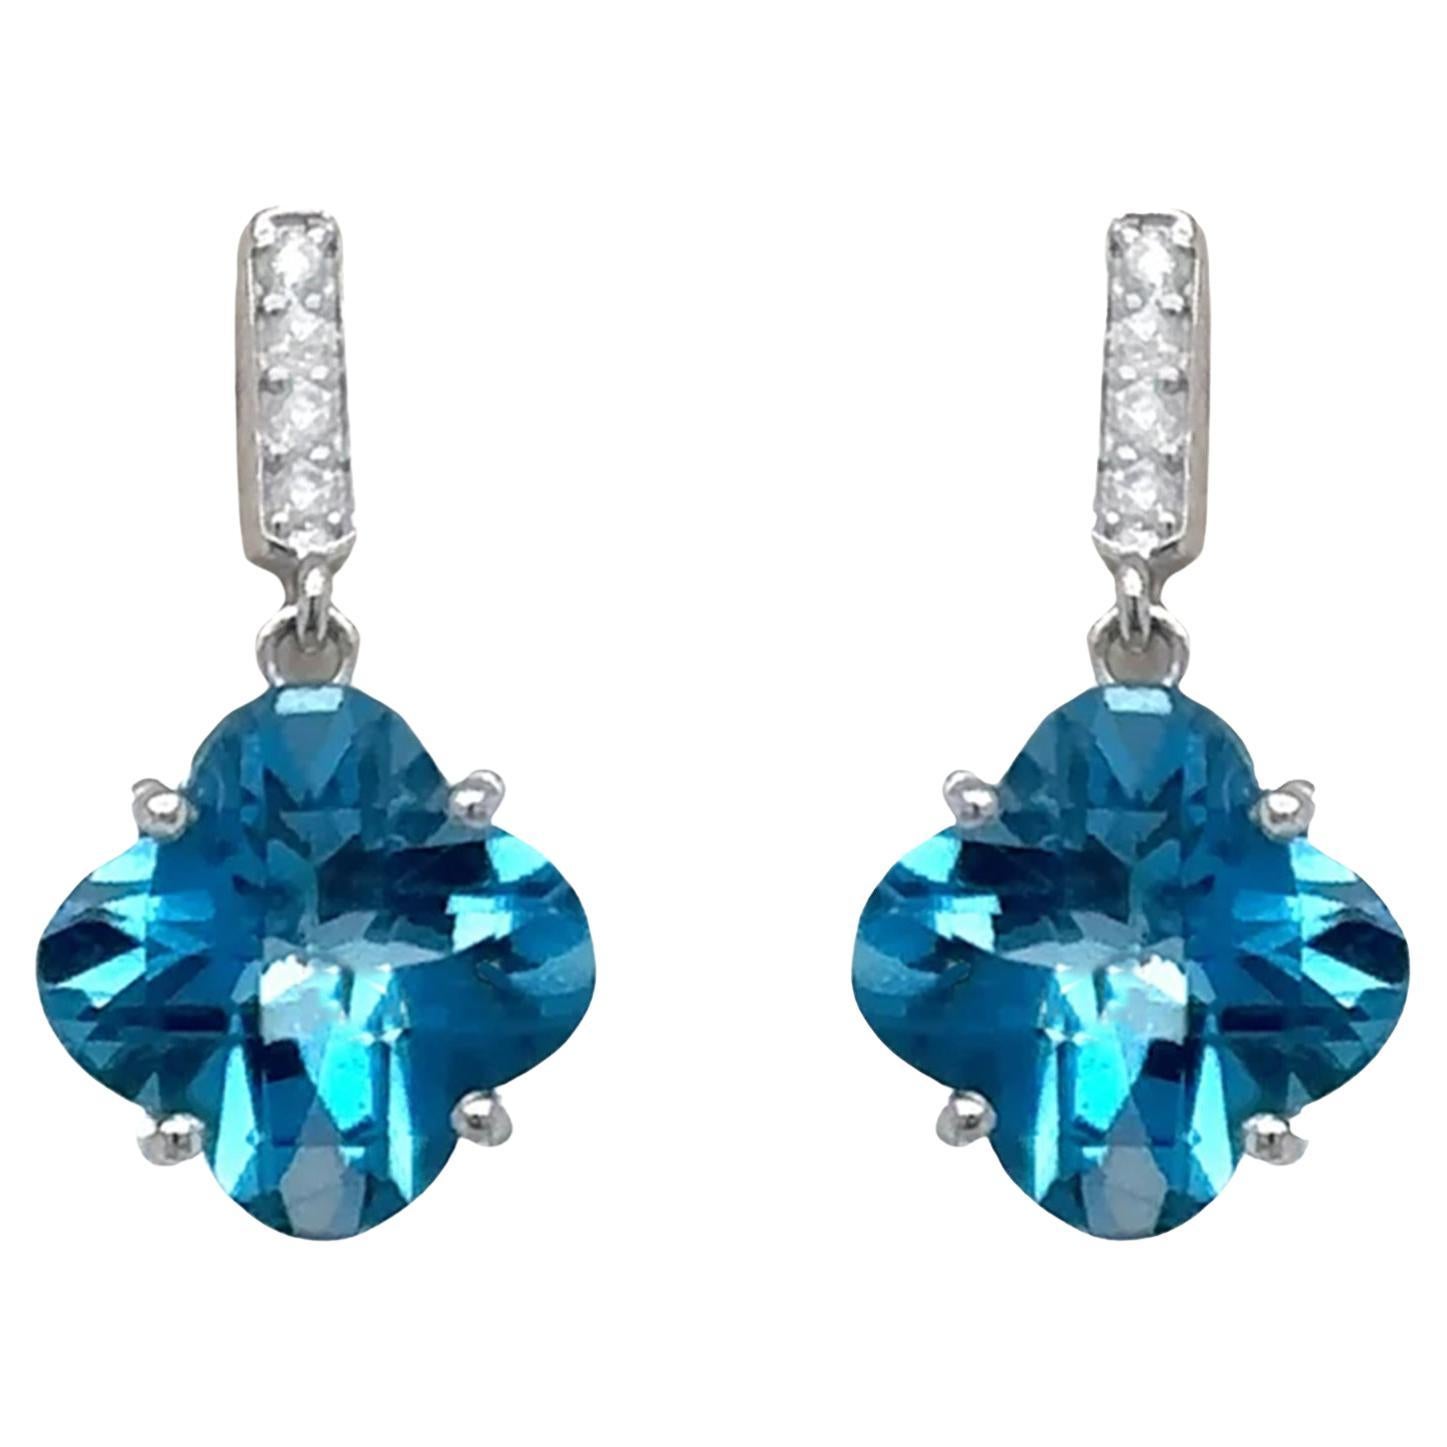 Blue Topaz Dangle Earrings With Diamonds 5.48 Carats 18K White Gold For Sale